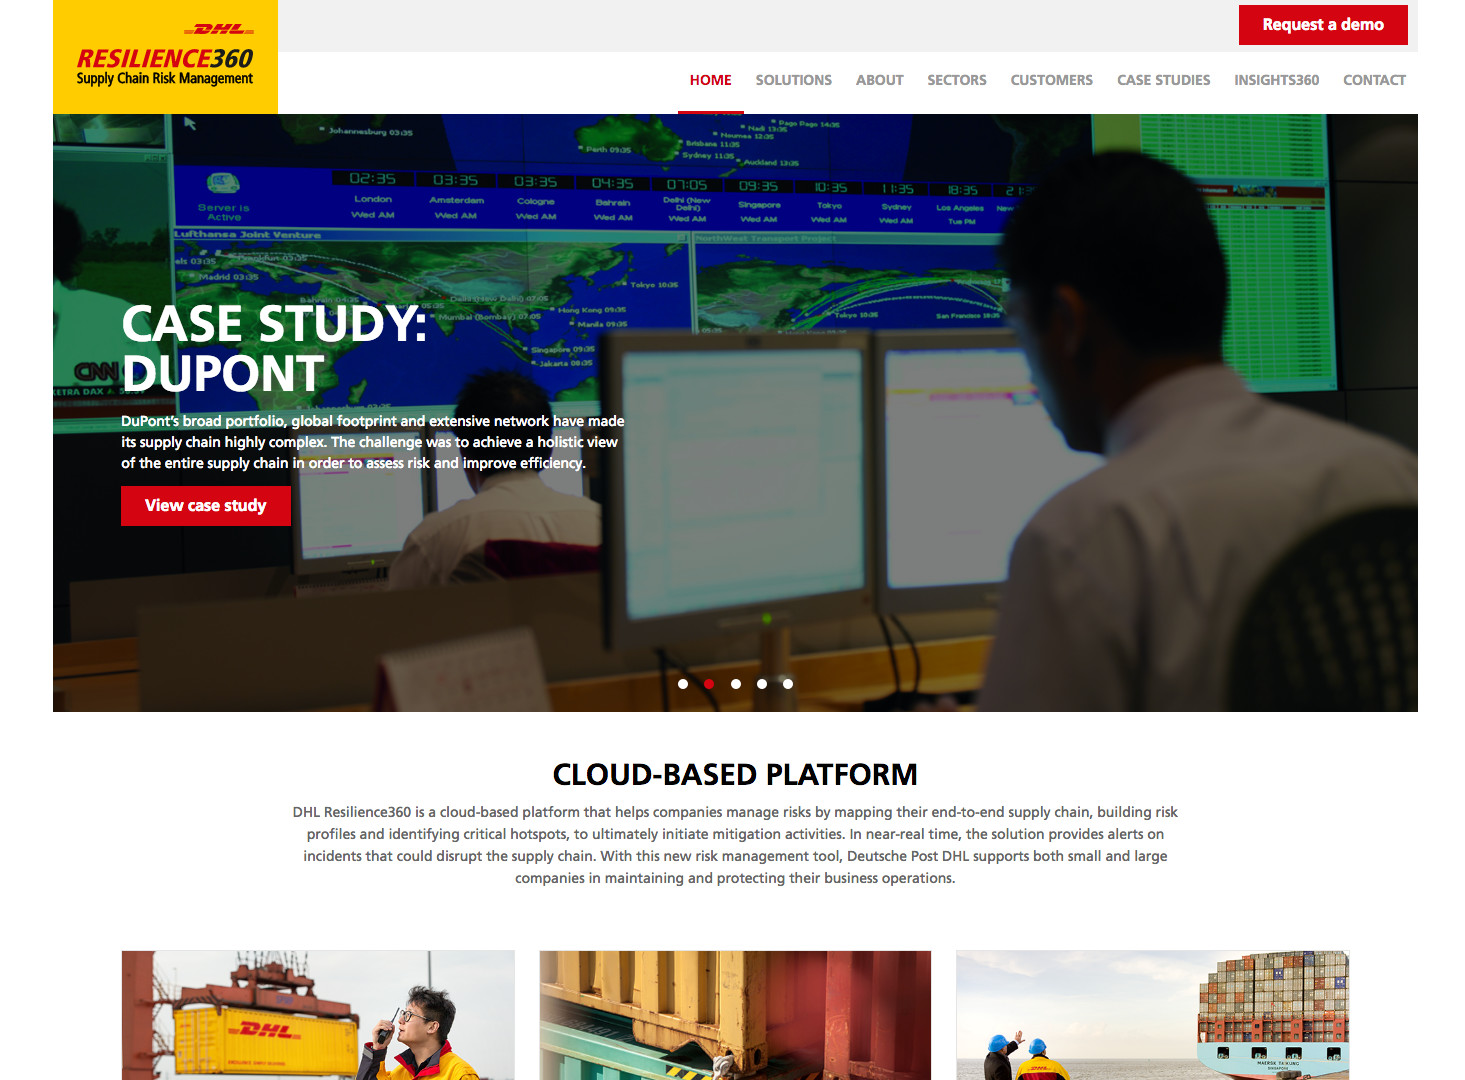 DHL – Resilience 360